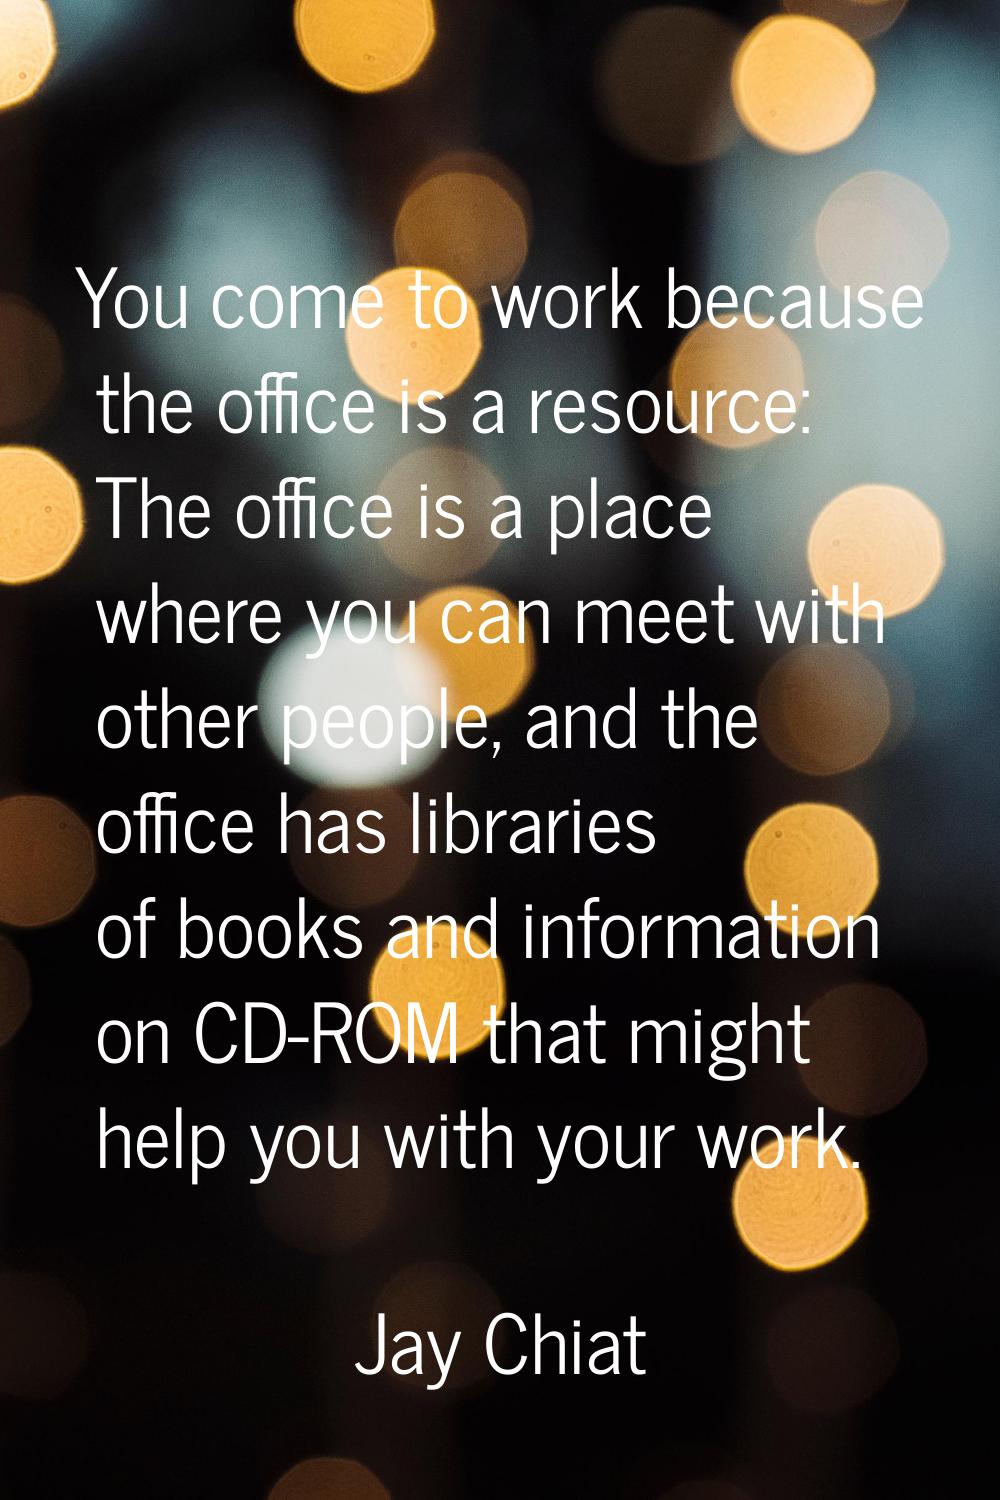 You come to work because the office is a resource: The office is a place where you can meet with ot